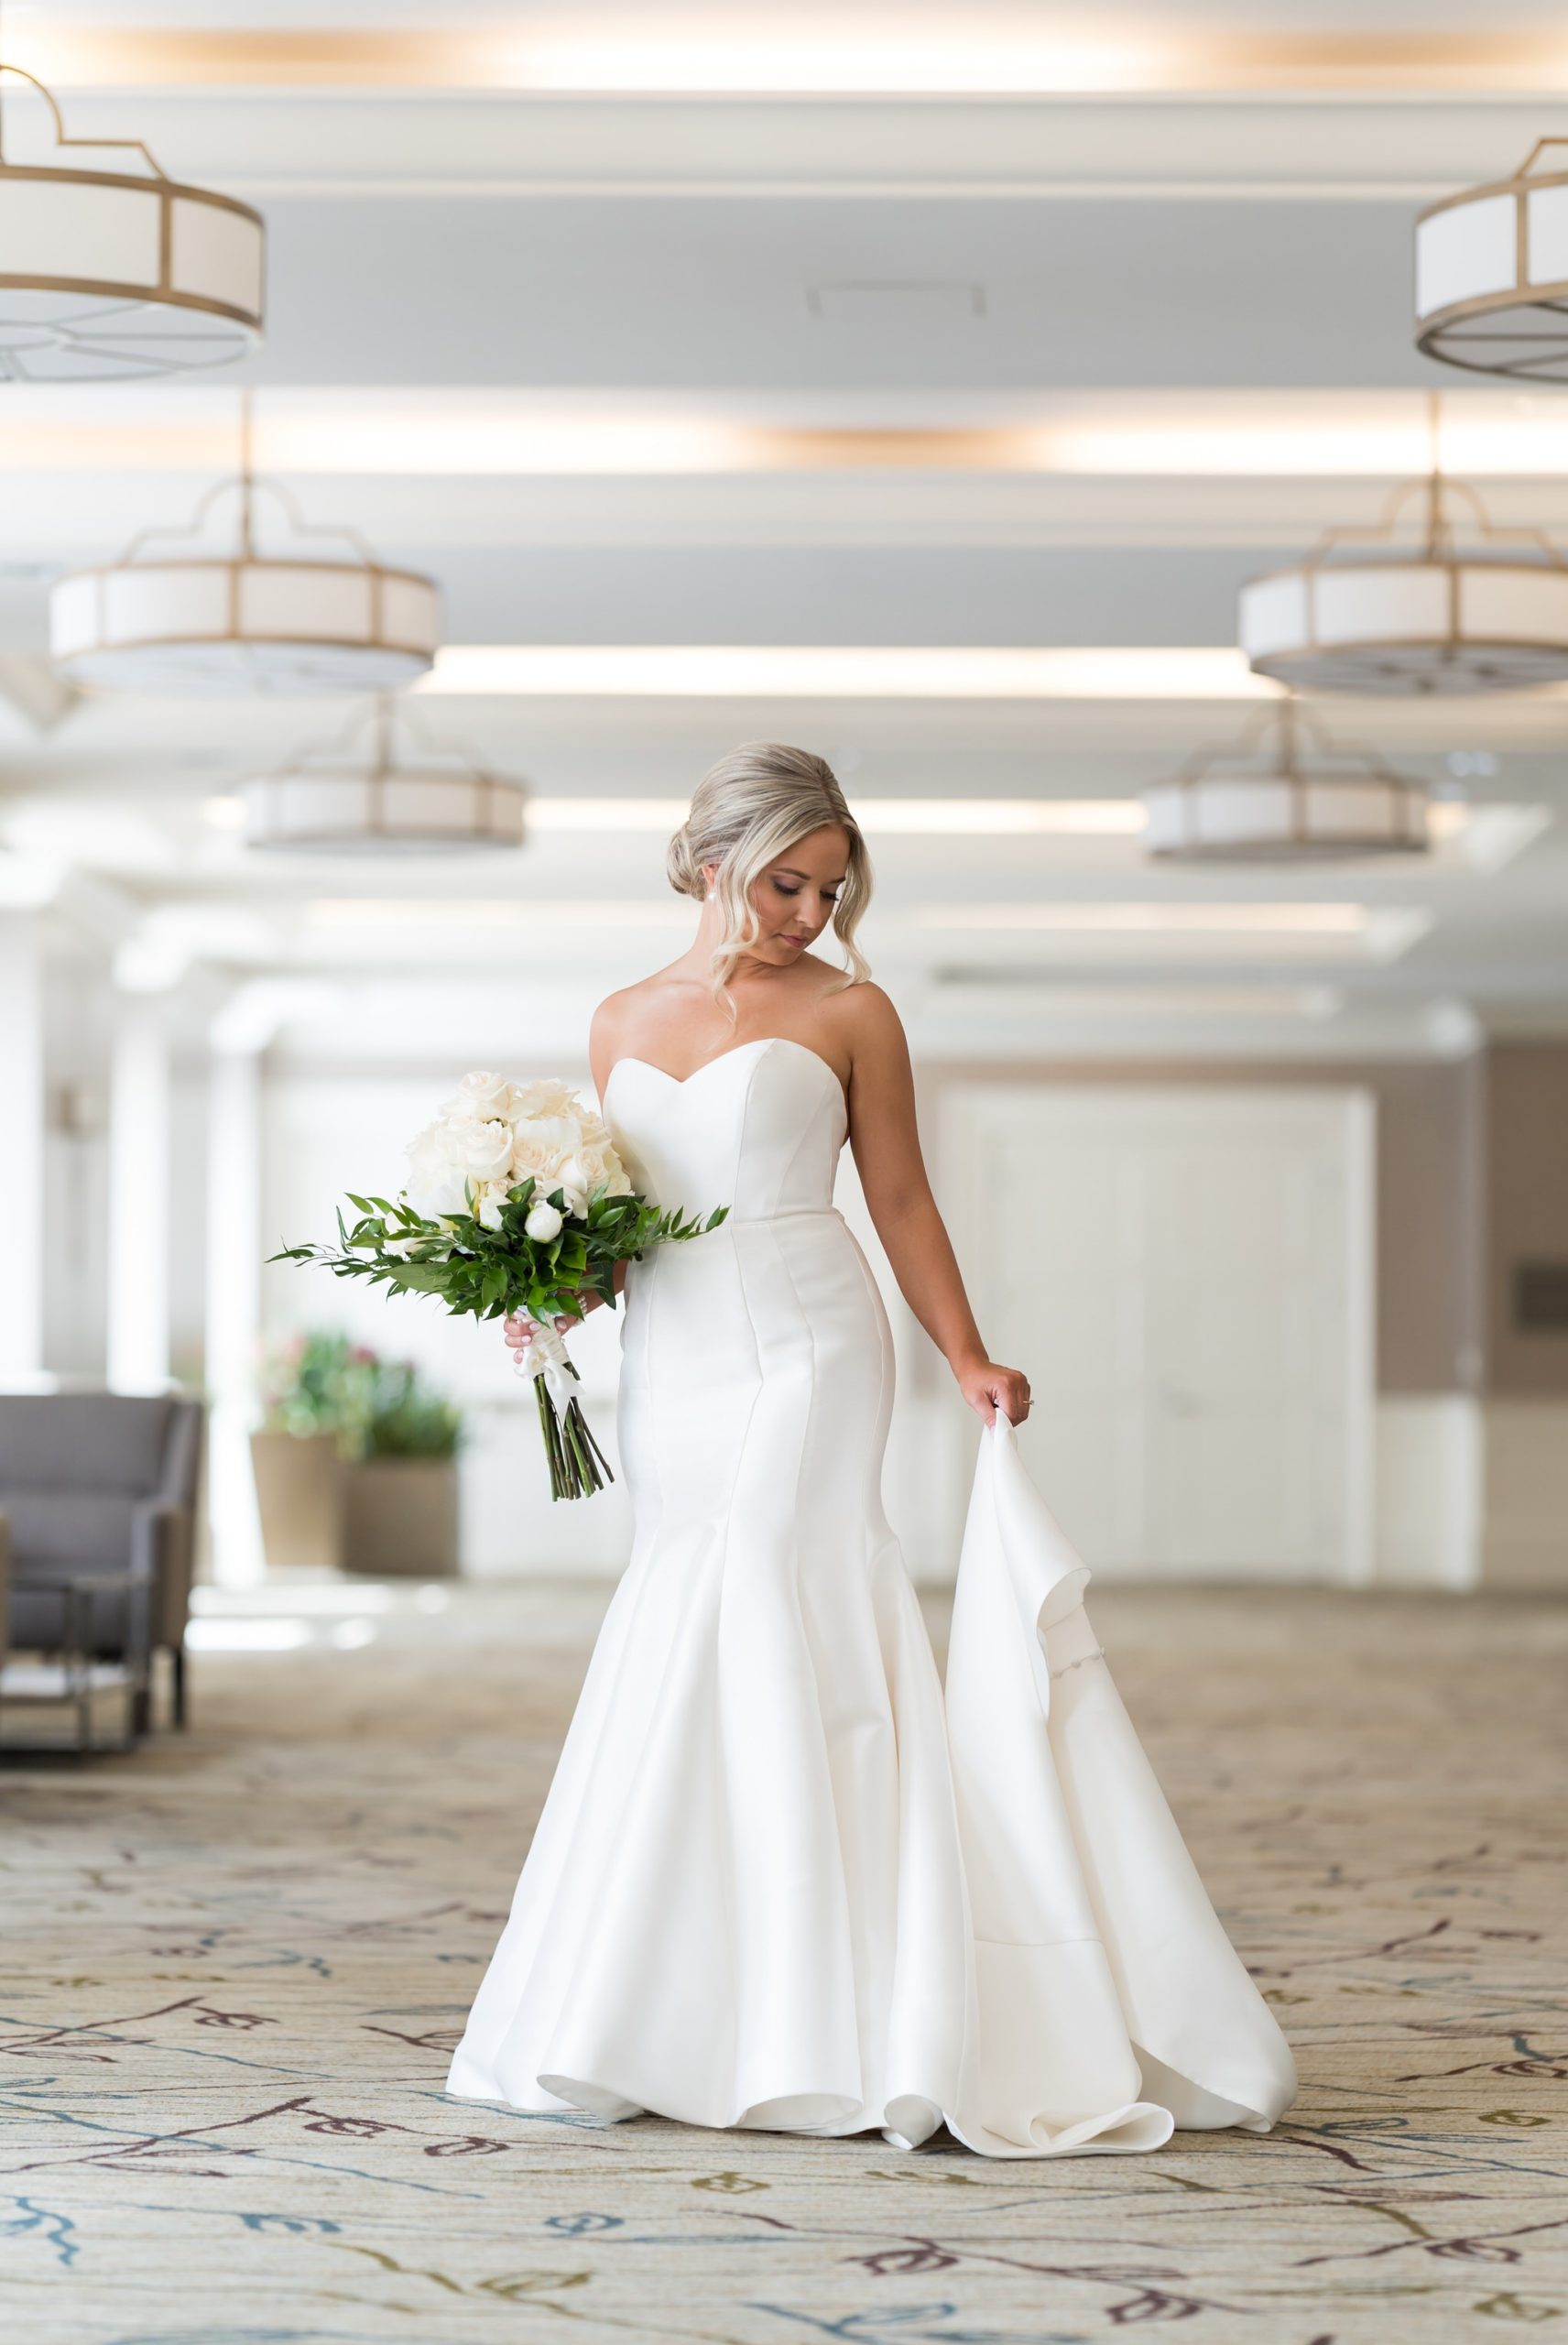 A bride holds her dress in a hotel lobby.  